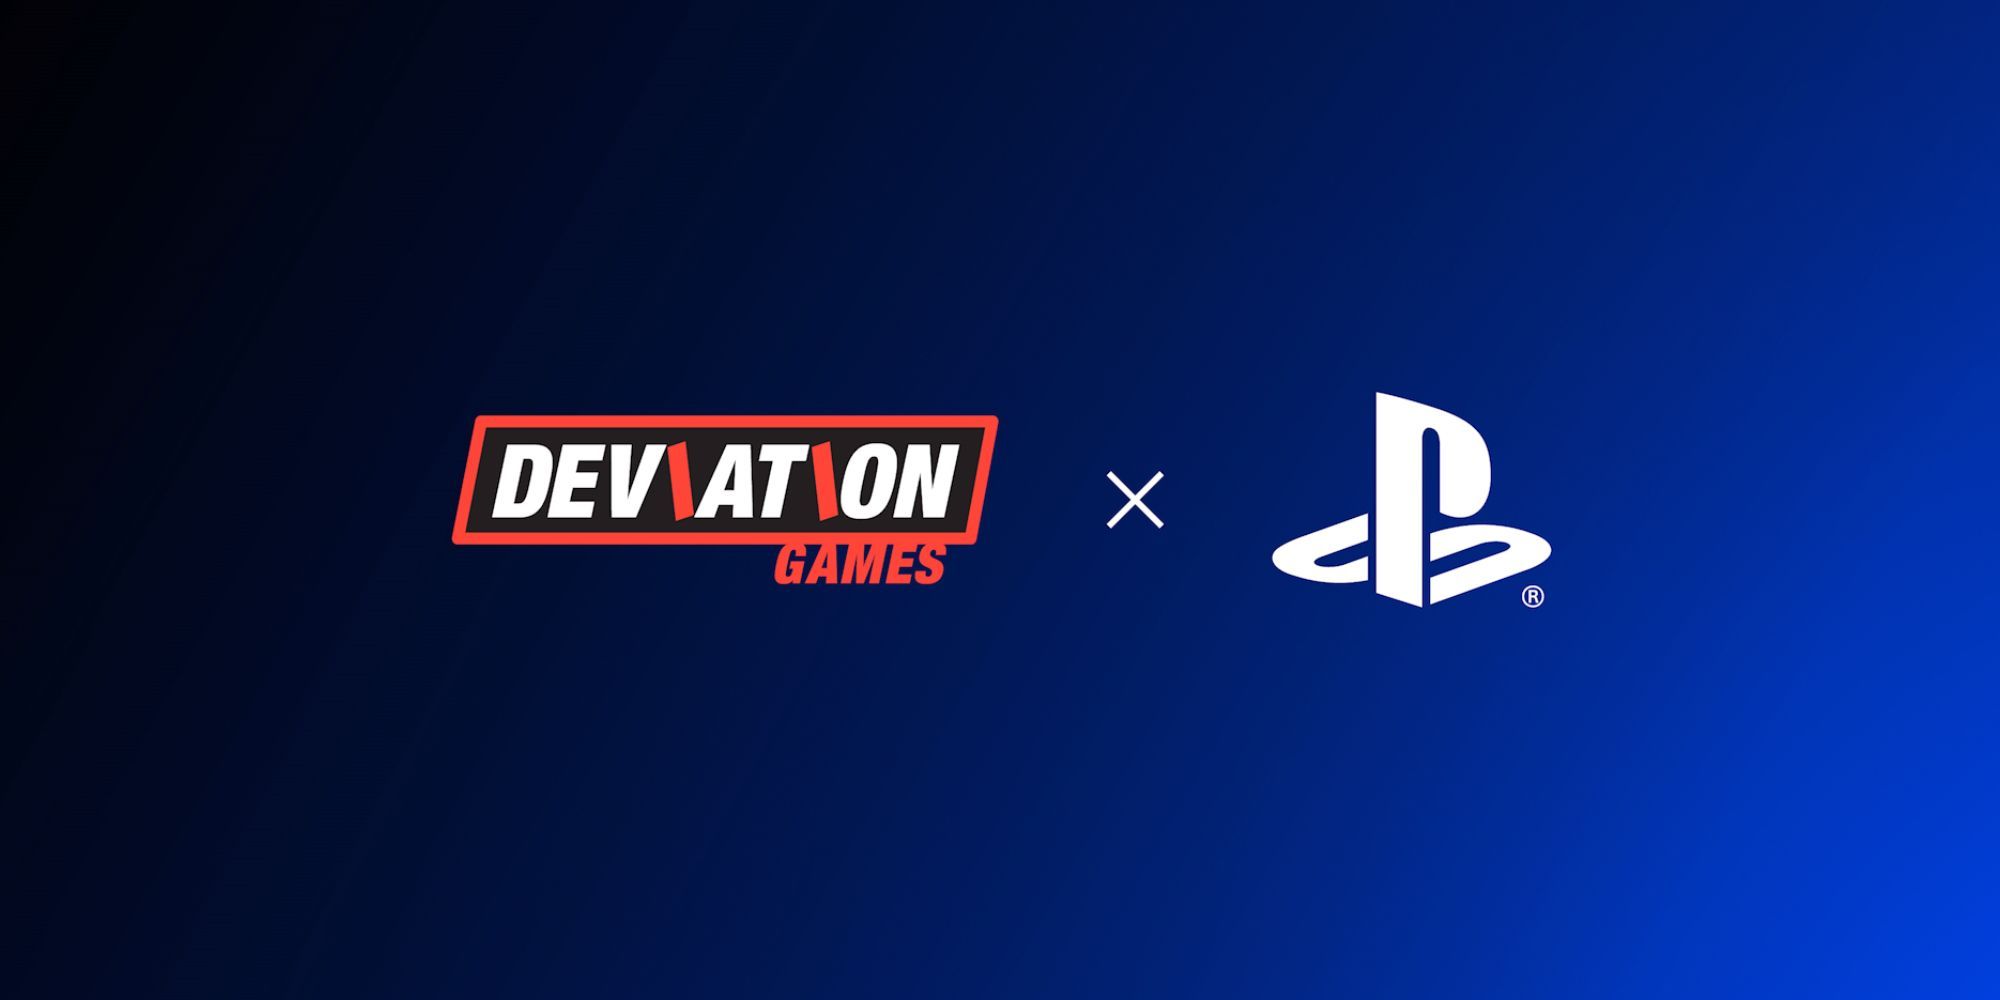 Deviation Games logo next to the PlayStation logo on a blue background